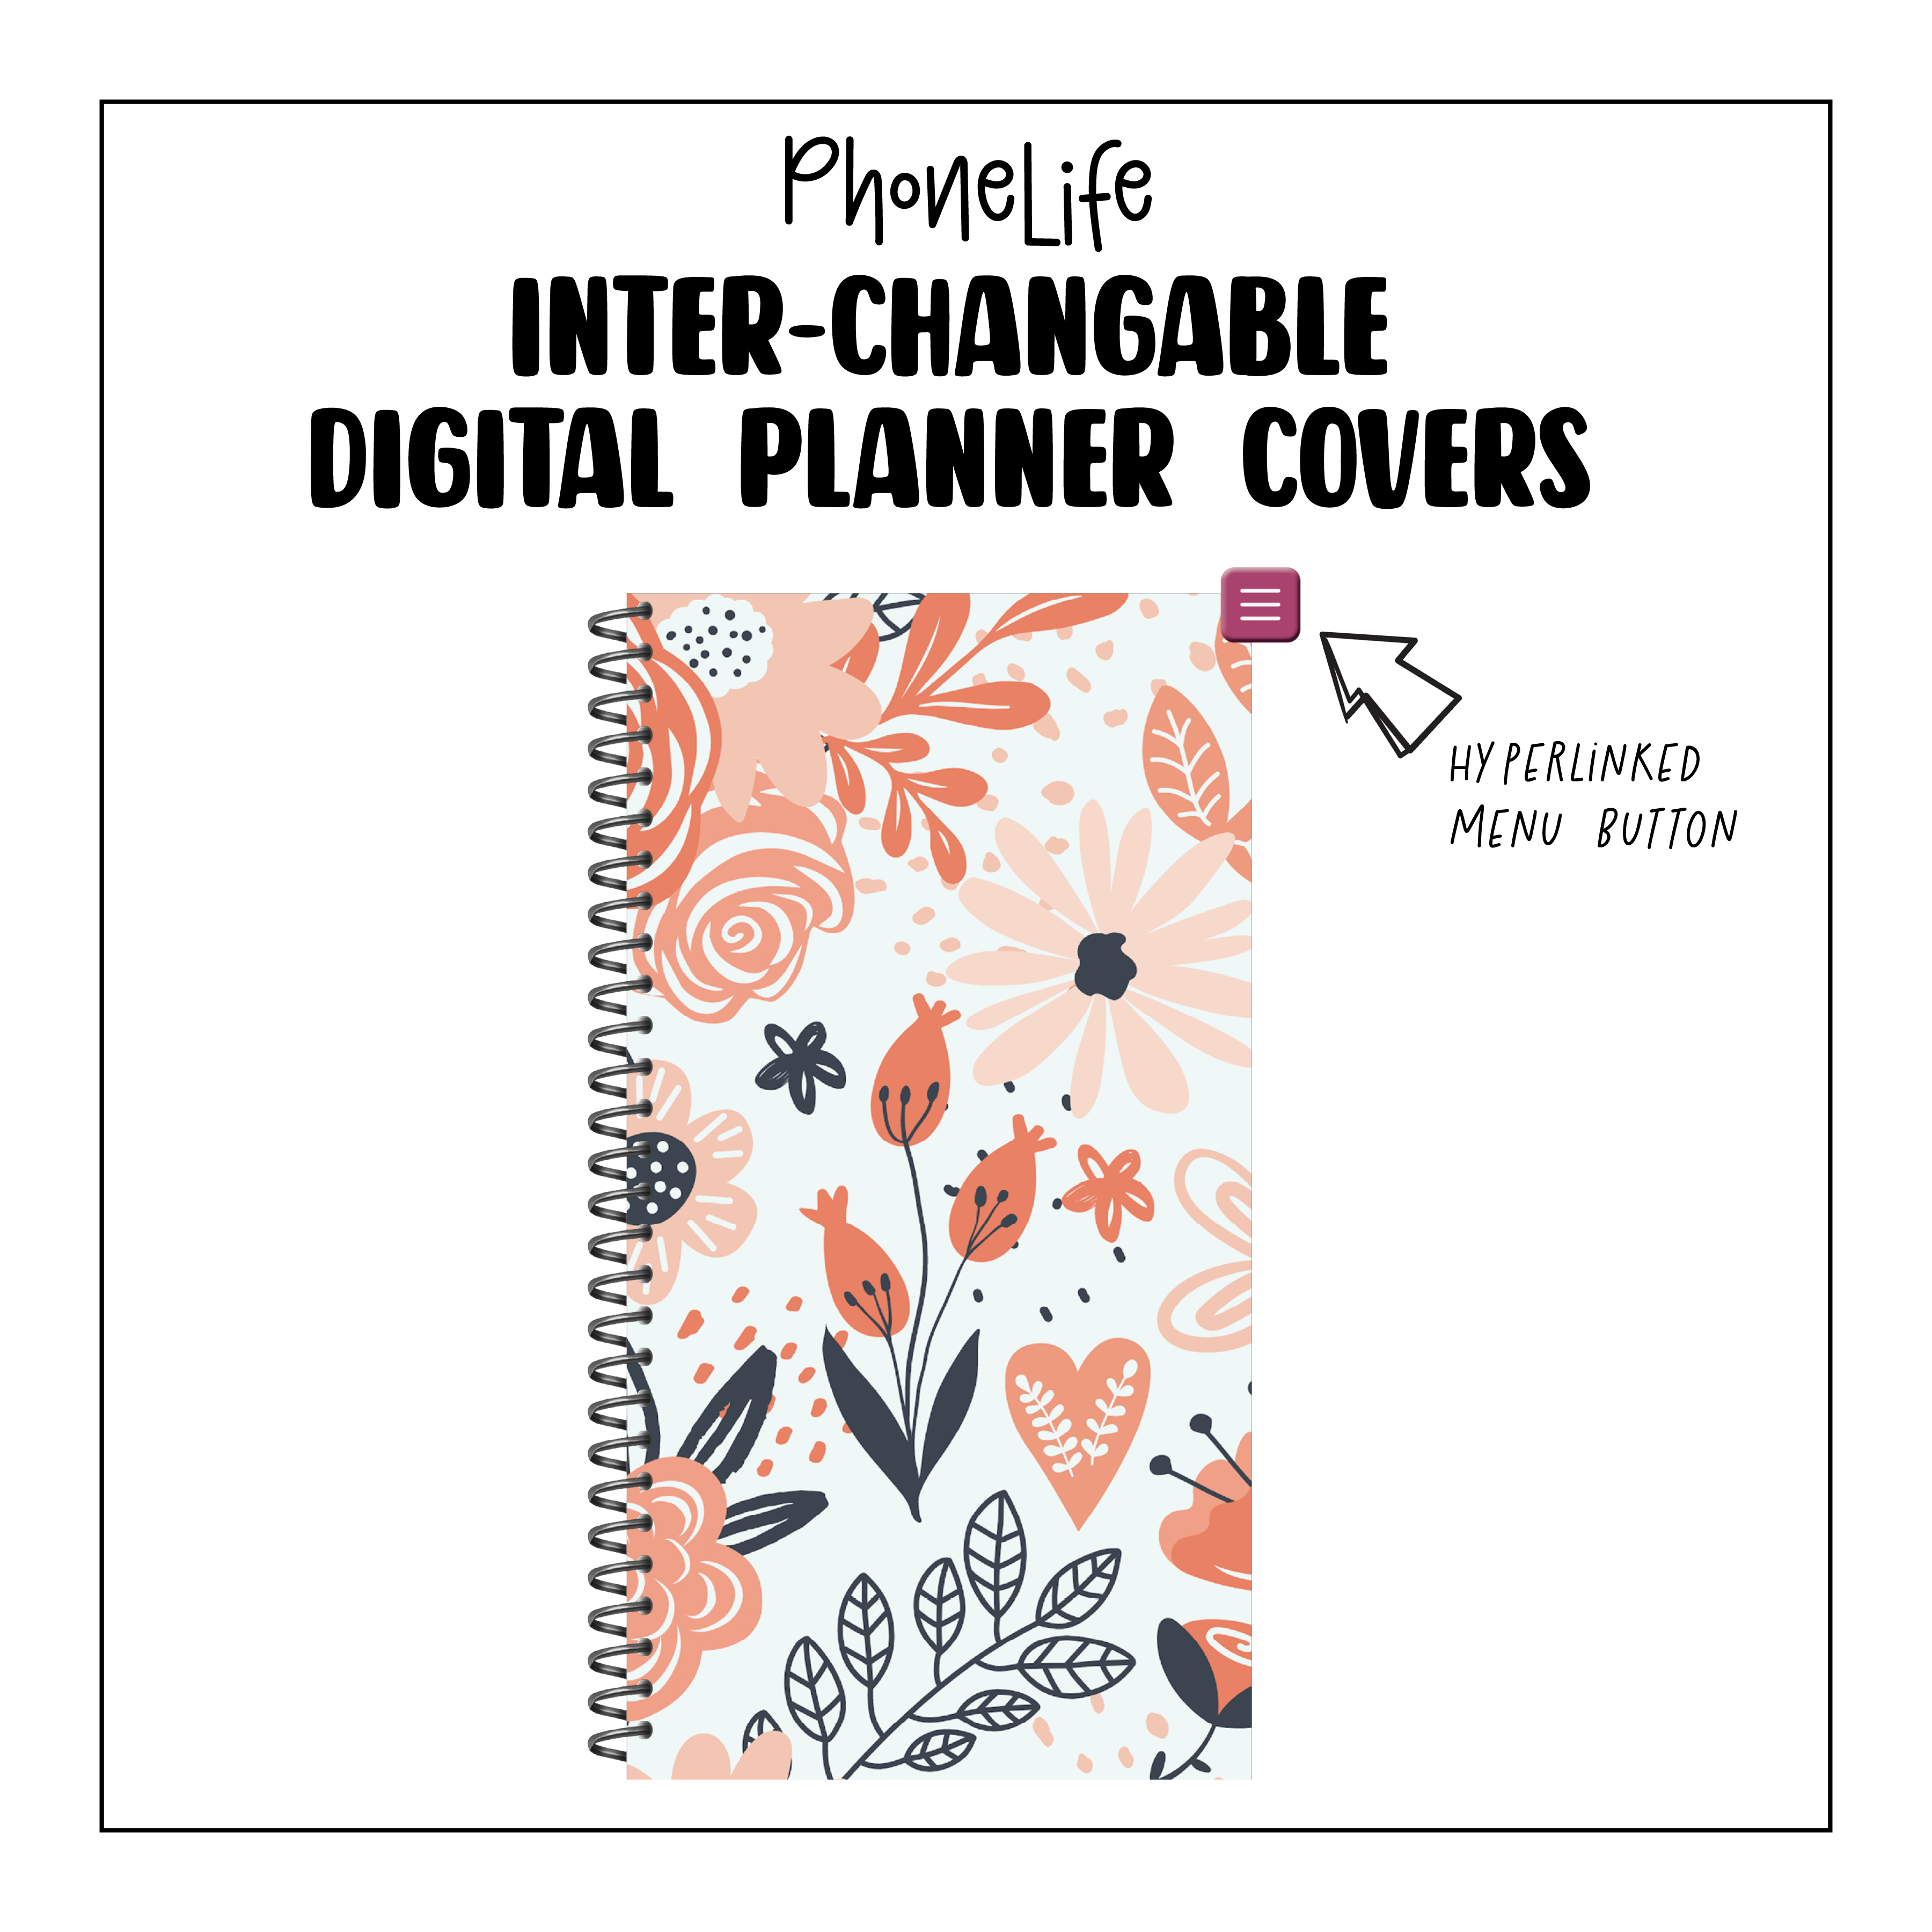 PhoneLife Interchangeable Digital Planner Cover | MIDNIGHT BOHO BLOSSOMS 7